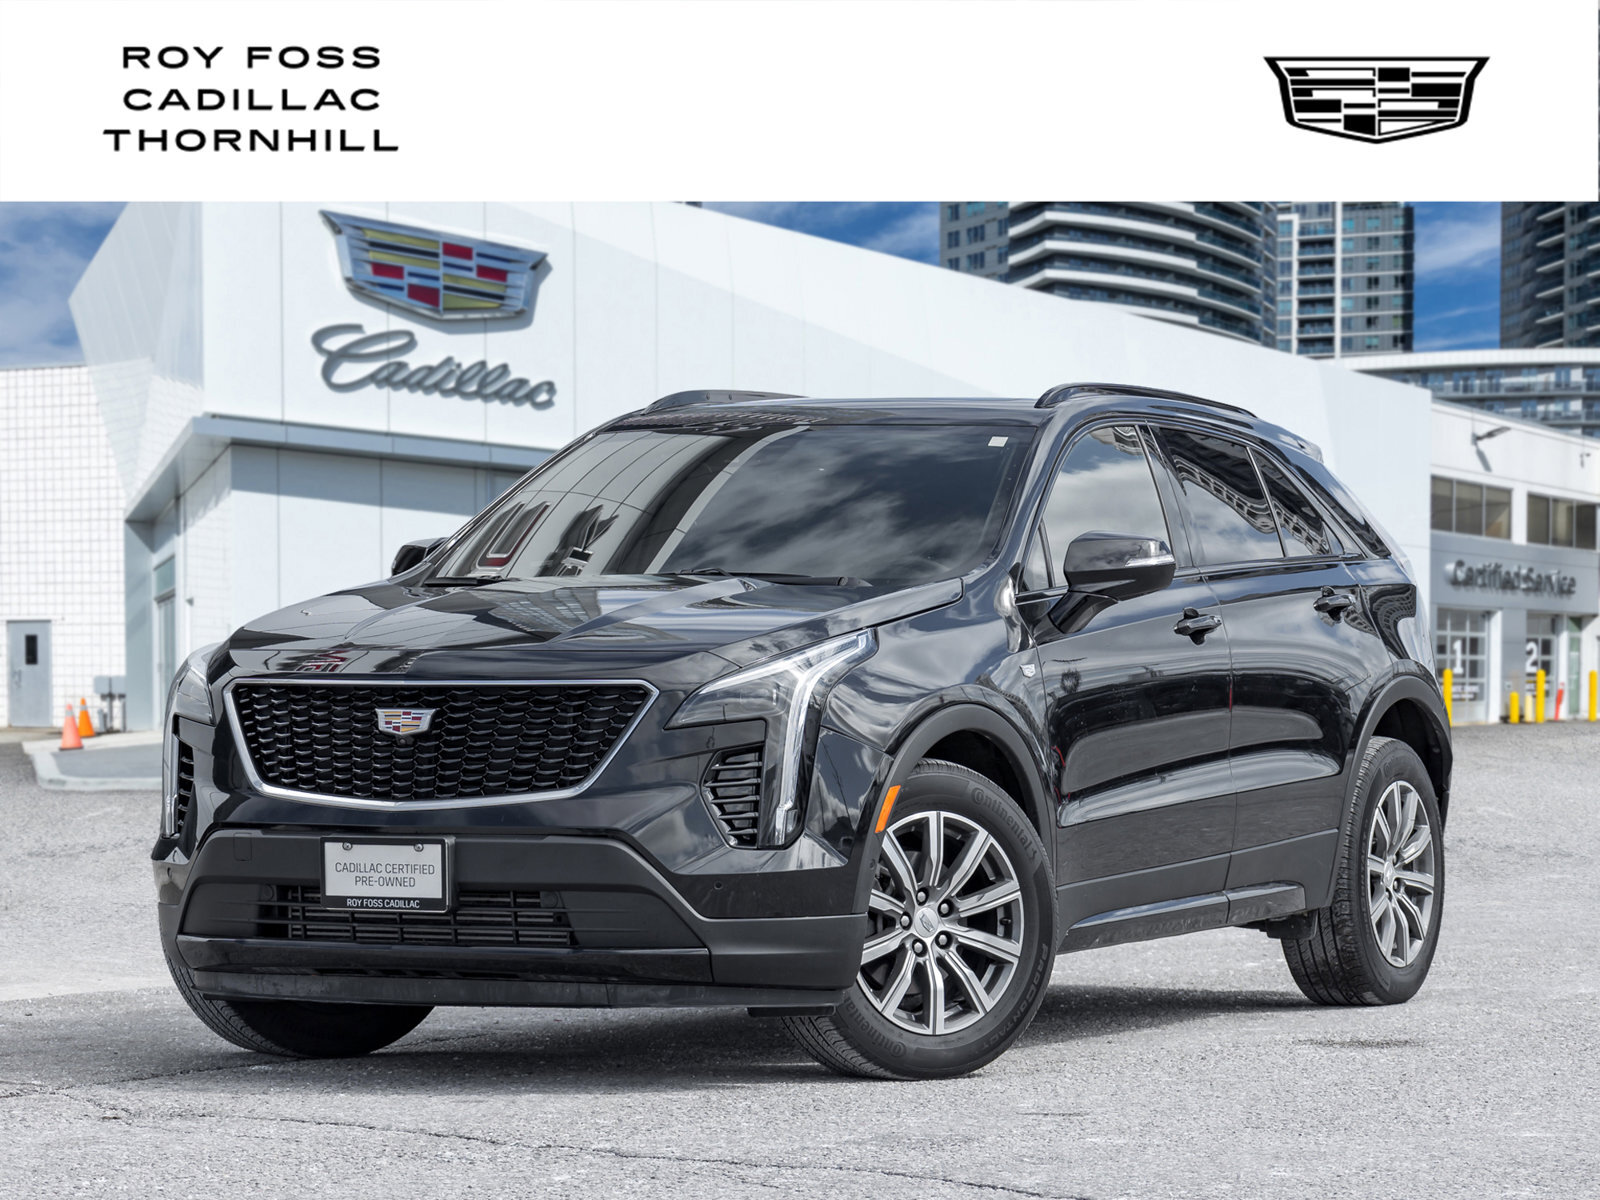 2022 Cadillac XT4 RATES STARTING FROM 4.99%+1 OWNER+LOW KM+CERTIFIED